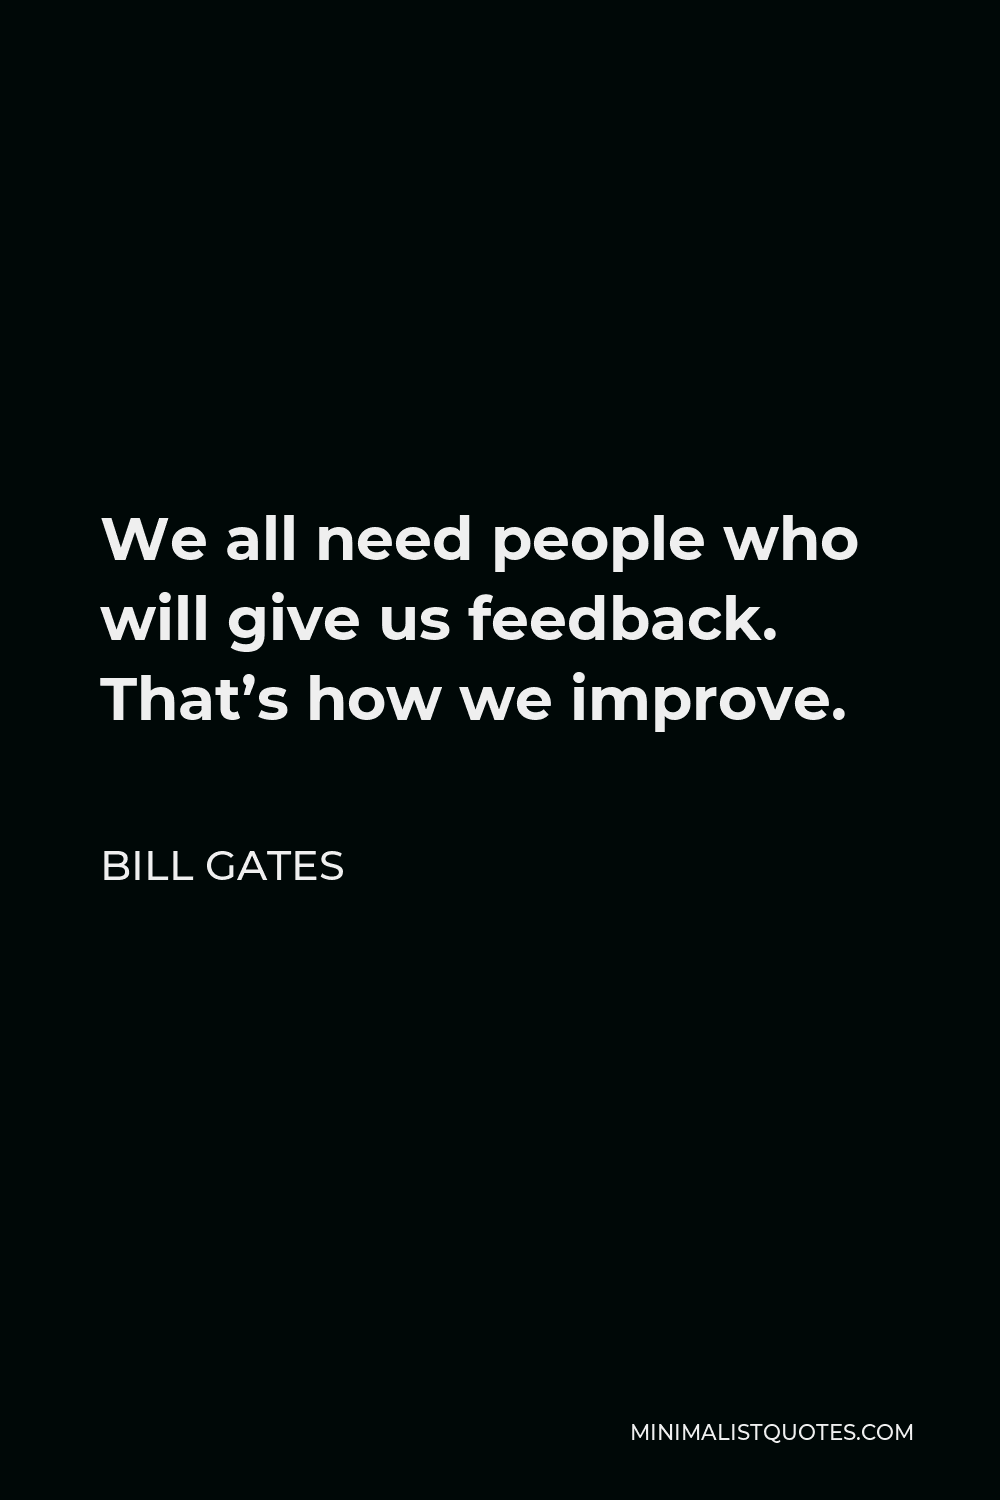 Bill Gates Quote - We all need people who will give us feedback. That’s how we improve.